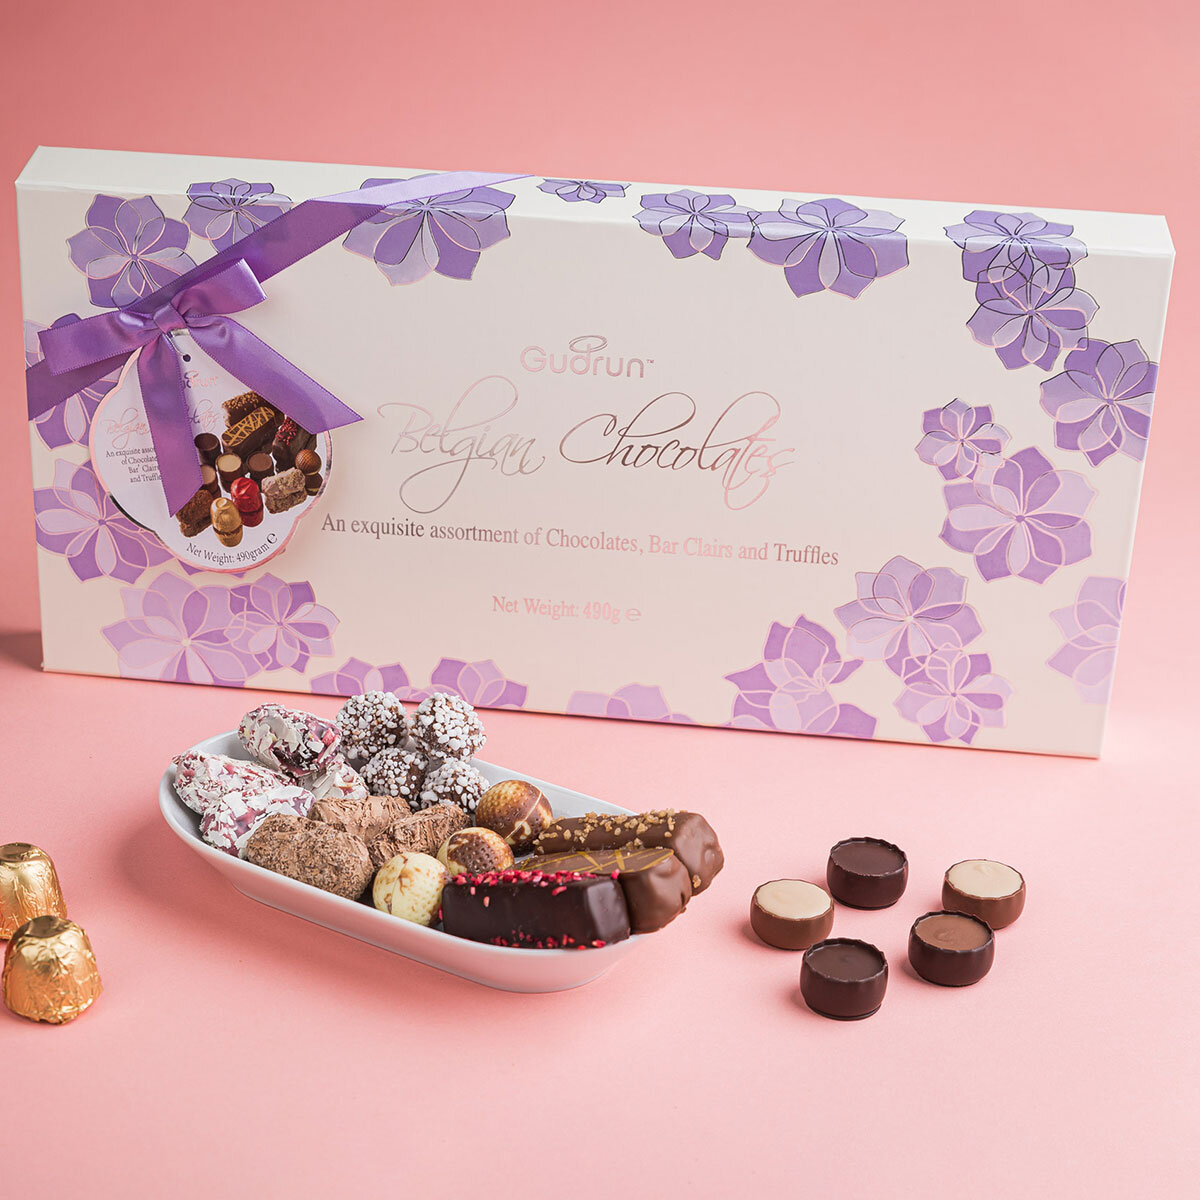 Clifestyle image of chocolate box on pink background